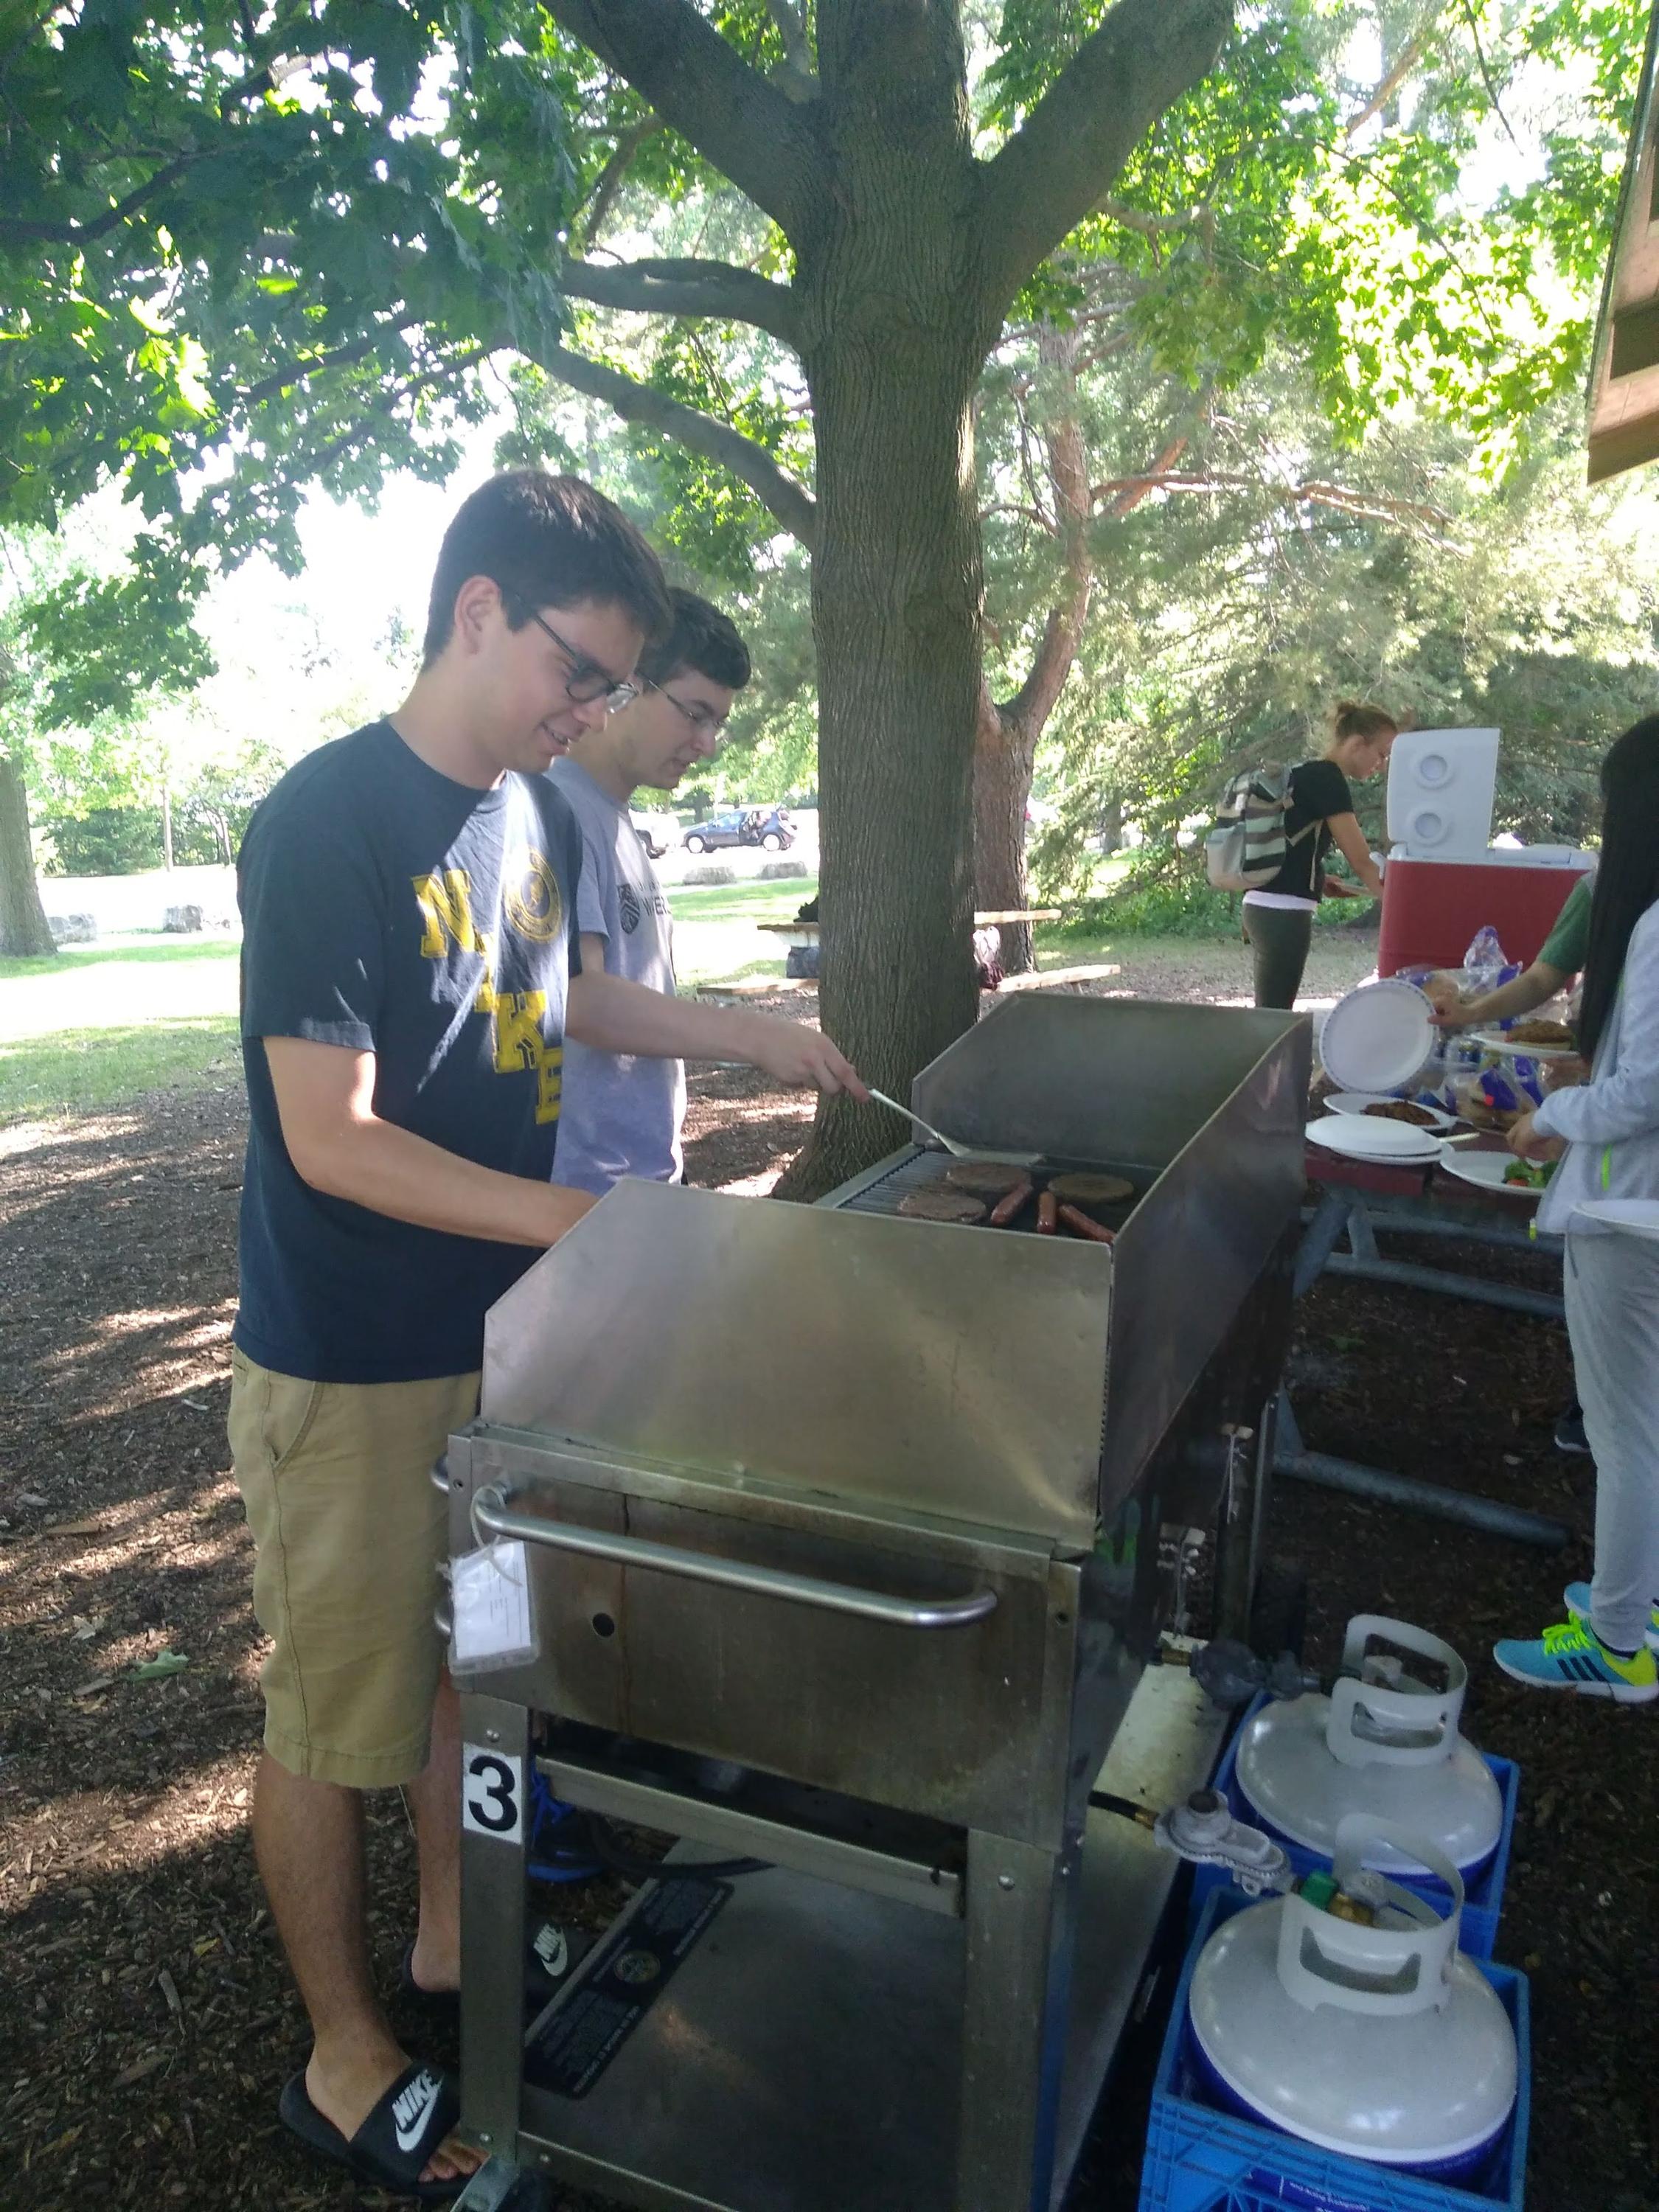 Two students barbecuing in the park